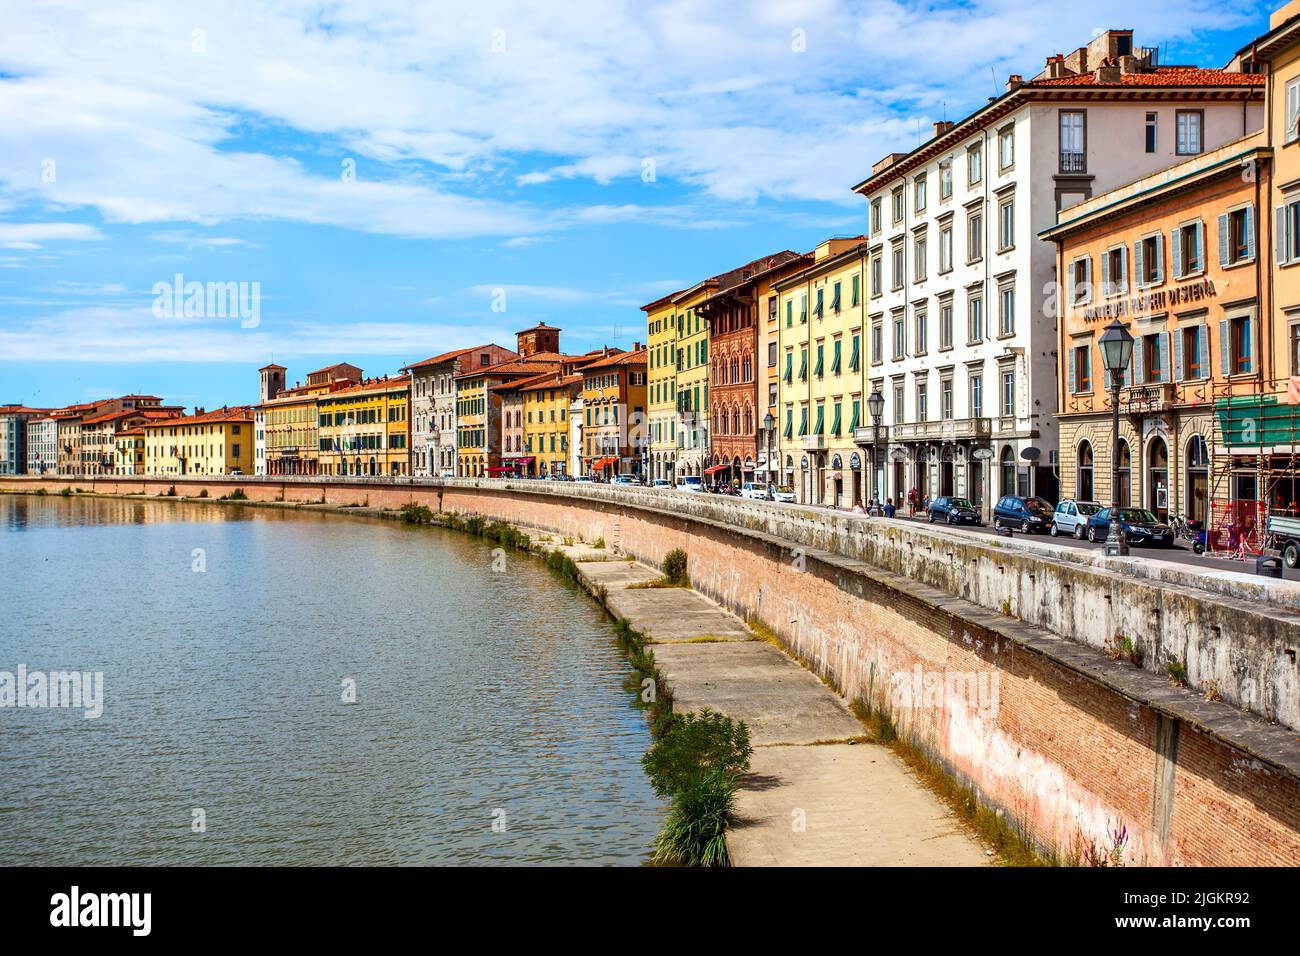 Pisa, Italy - September 3, 2014: Buildings by Arno river in The Old town of Pisa Stock Photo